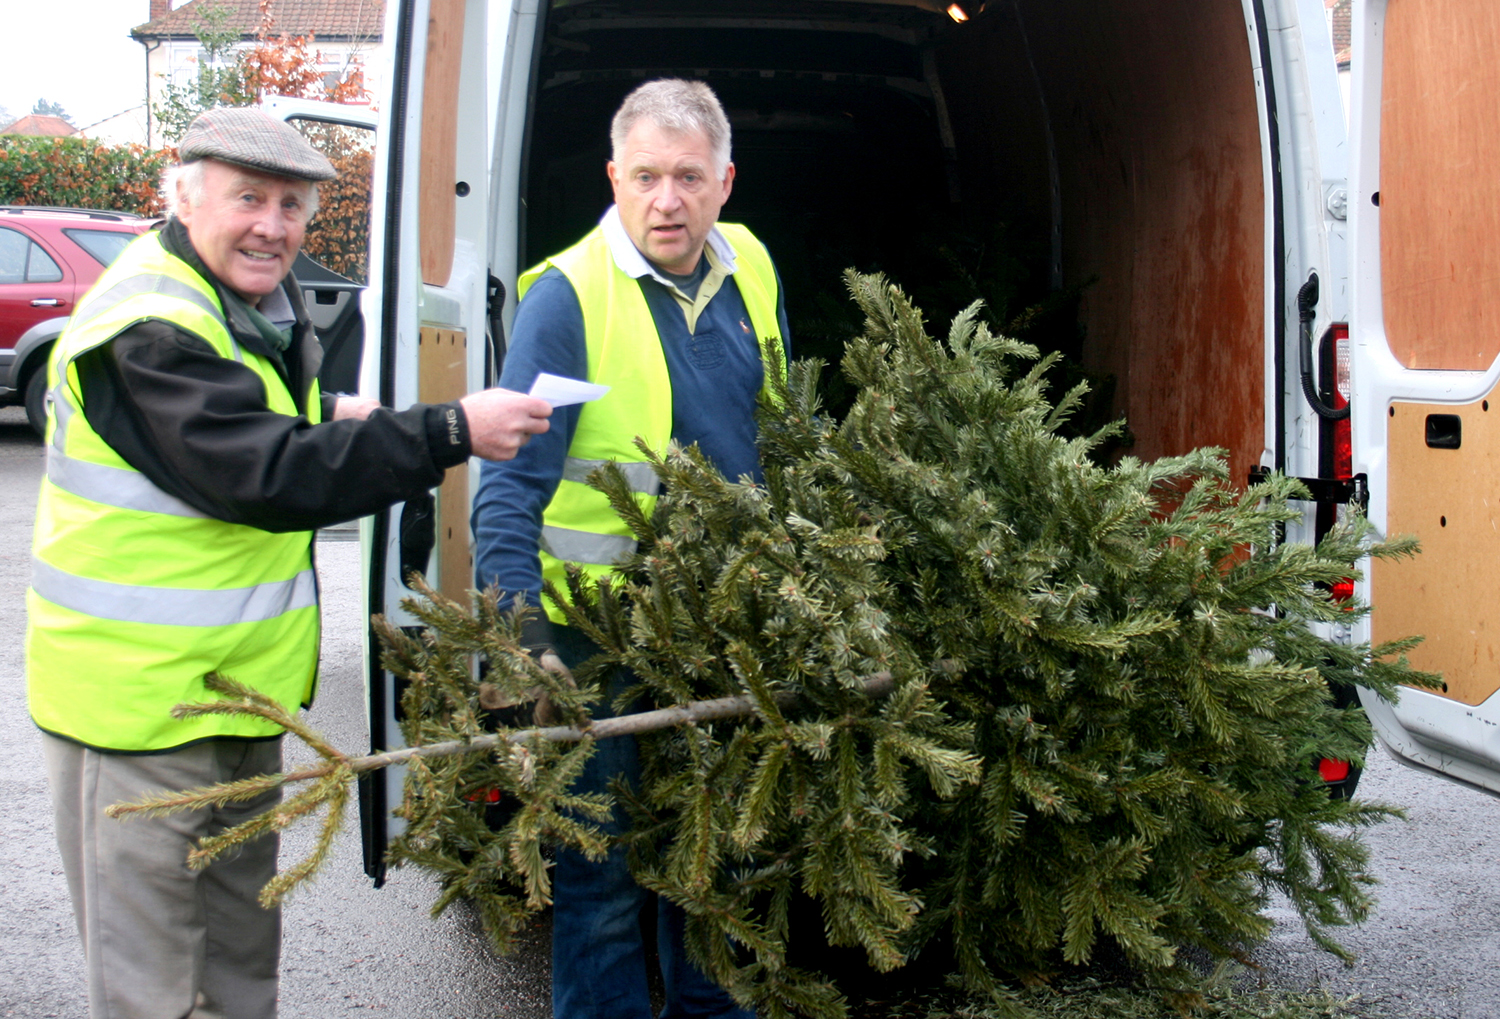 Xmas Tree Collection Raised £7k for Charity